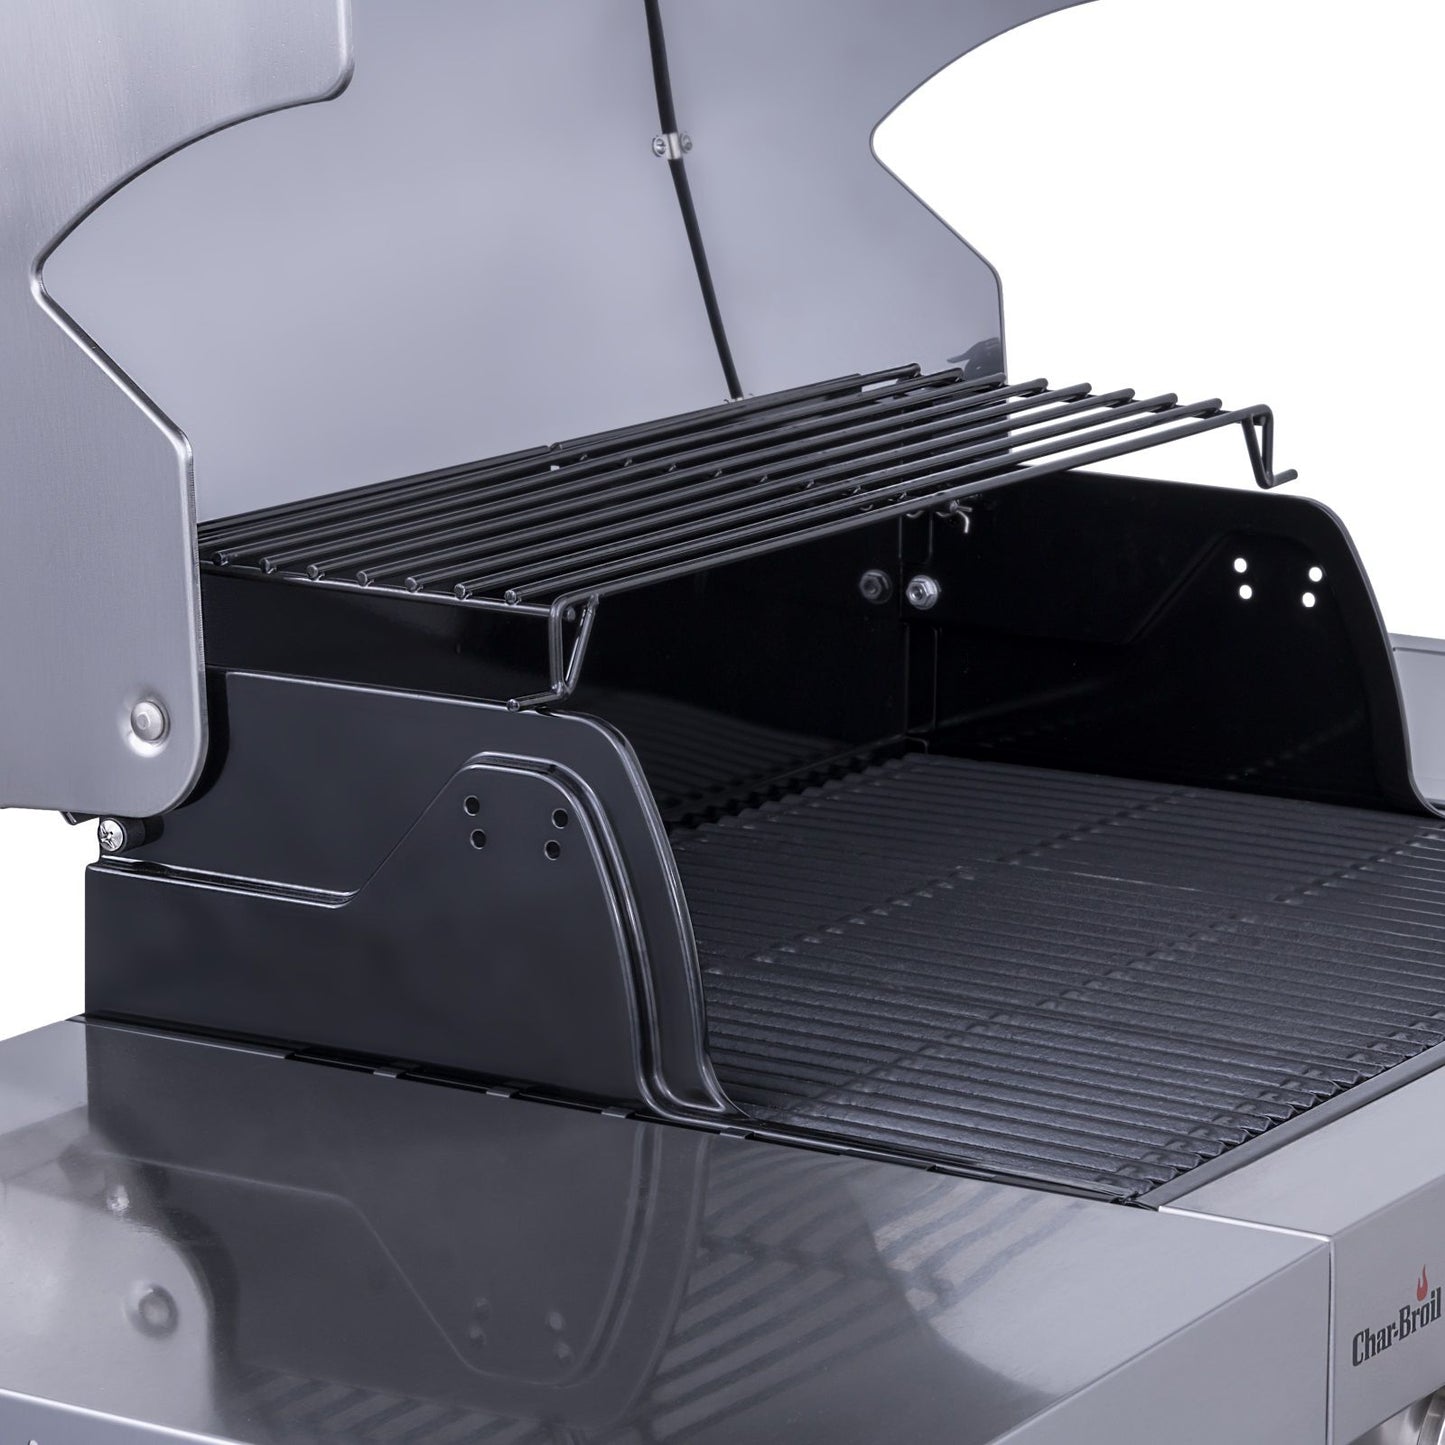 The Char-Broil® COMMERCIAL SERIES™ AMPLIFIRE™ 3-BURNER GAS GRILL